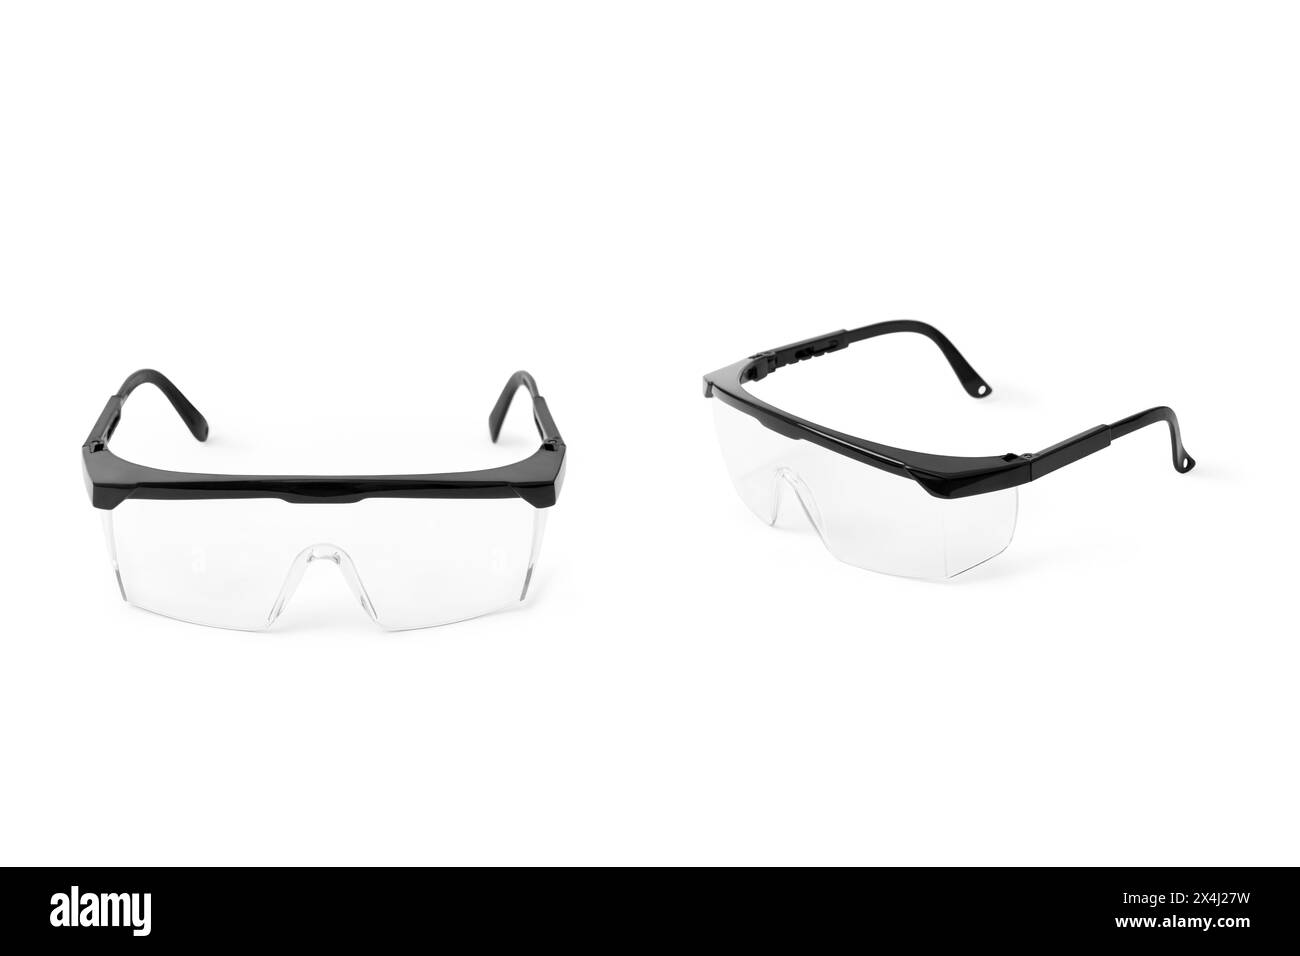 Protective black plastic eyeglasses isolated on white background, perspective view Stock Photo